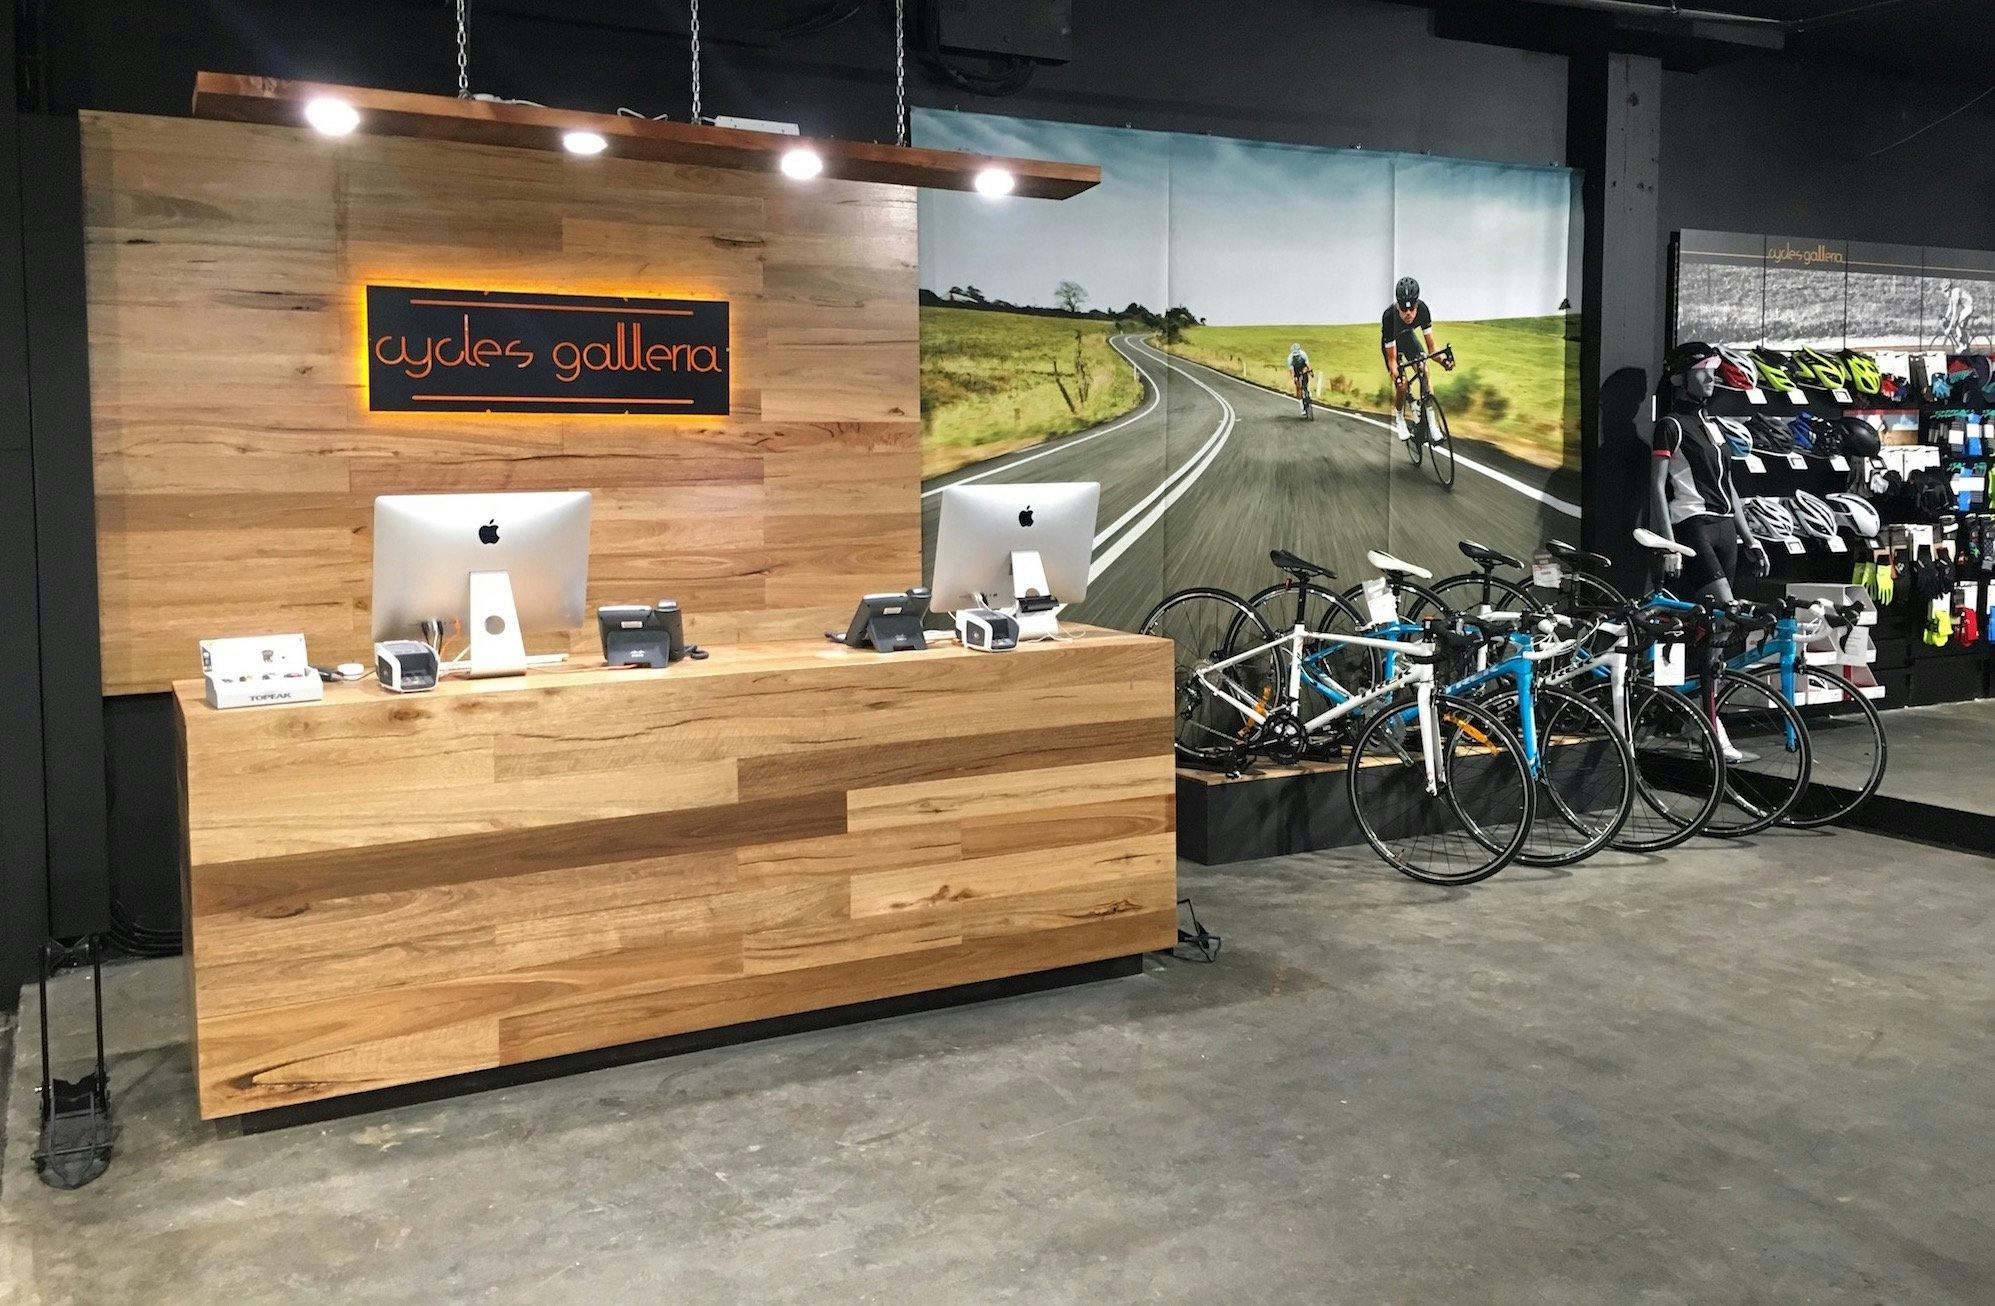 Cycles galleria eastland store